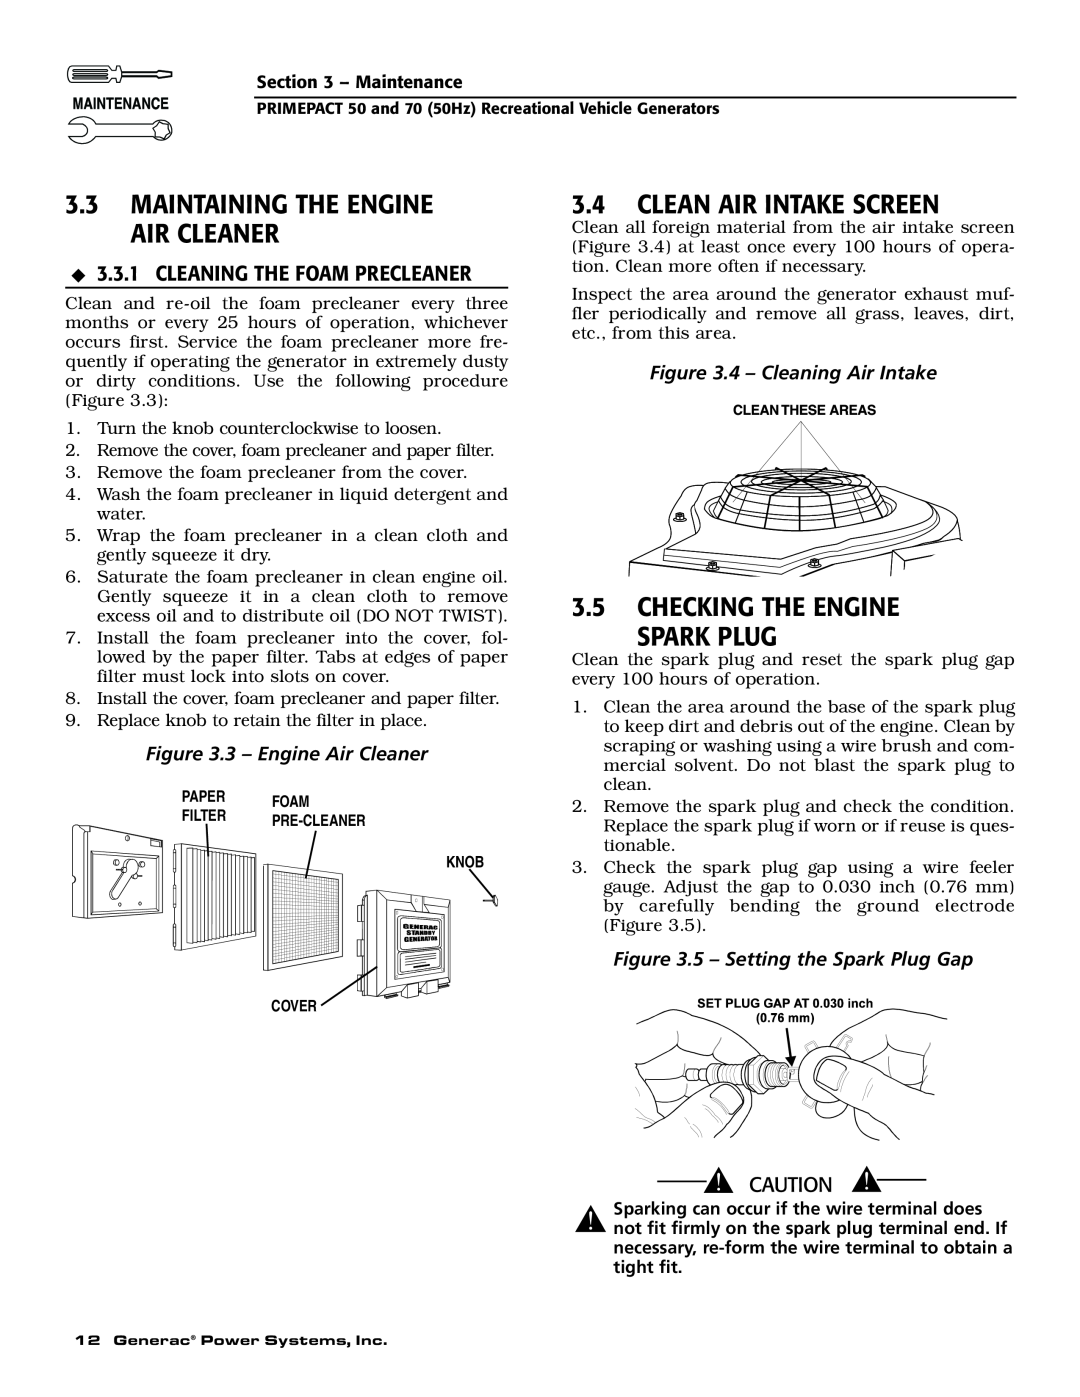 Generac 00784-2, 09290-4 Maintaining The Engine Air Cleaner, Clean Air Intake Screen, Checking The Engine Spark Plug 